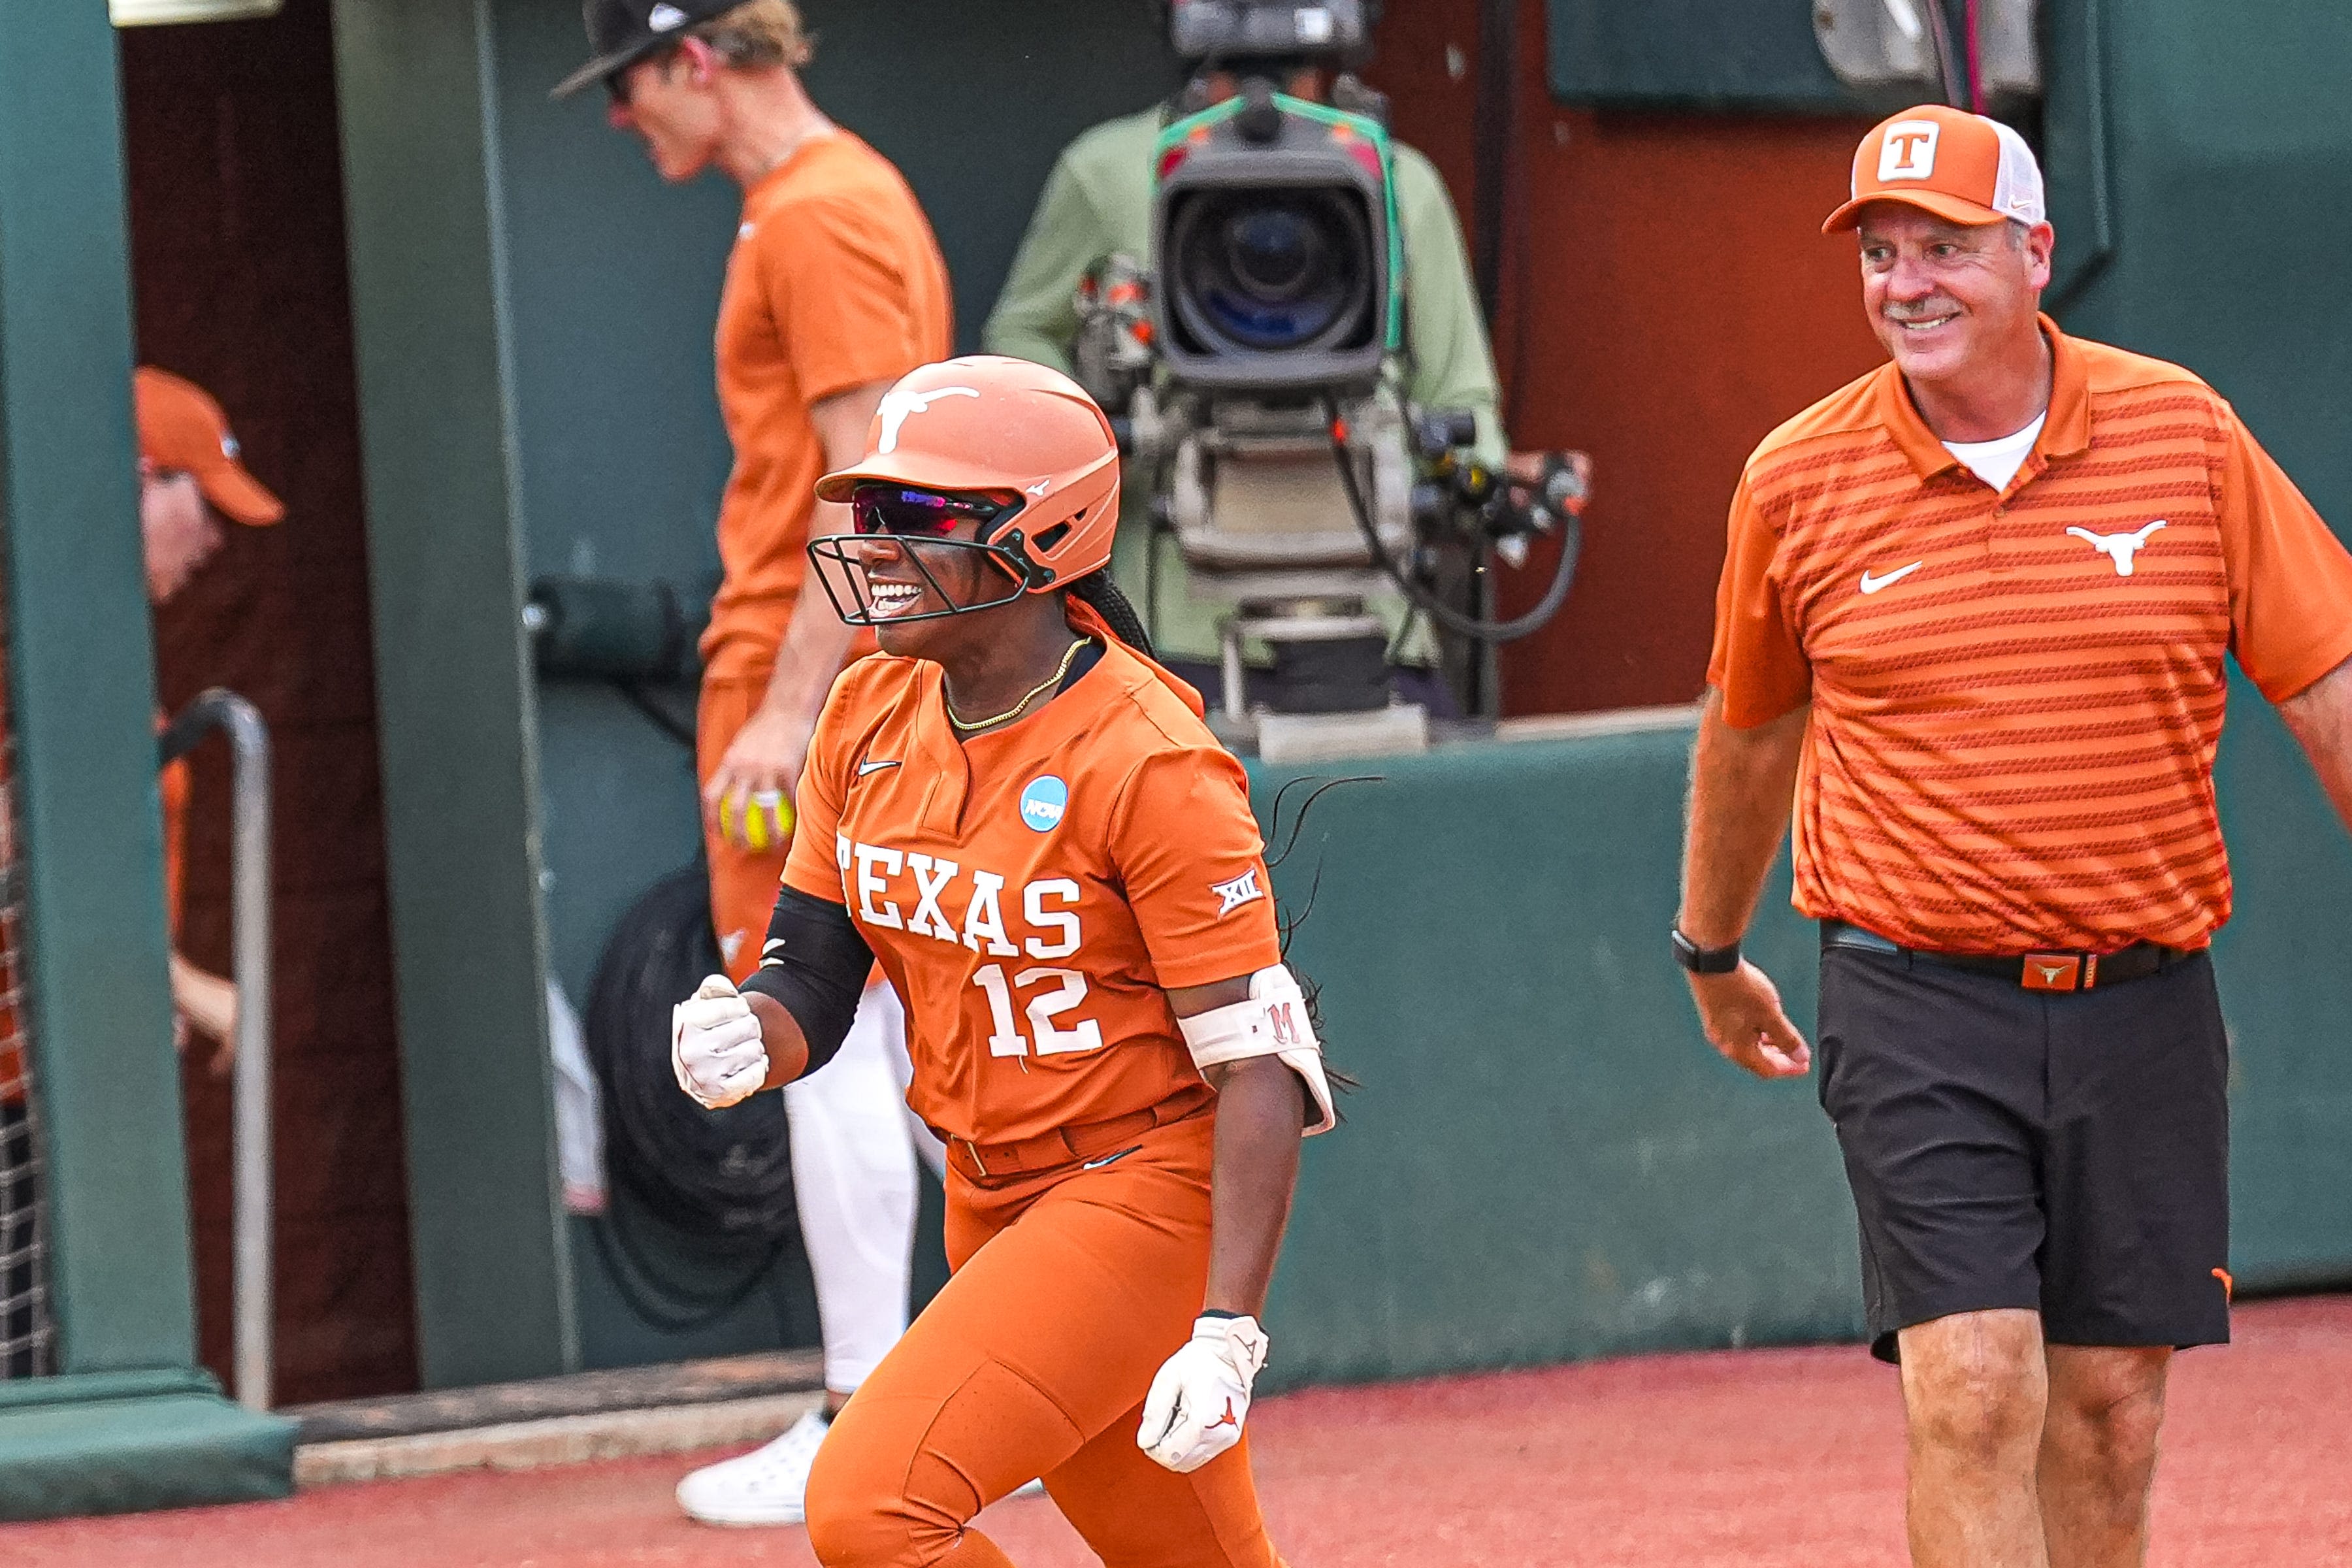 Texas softball drops game one to Texas A&M. What happens next for the No. 1 Longhorns?